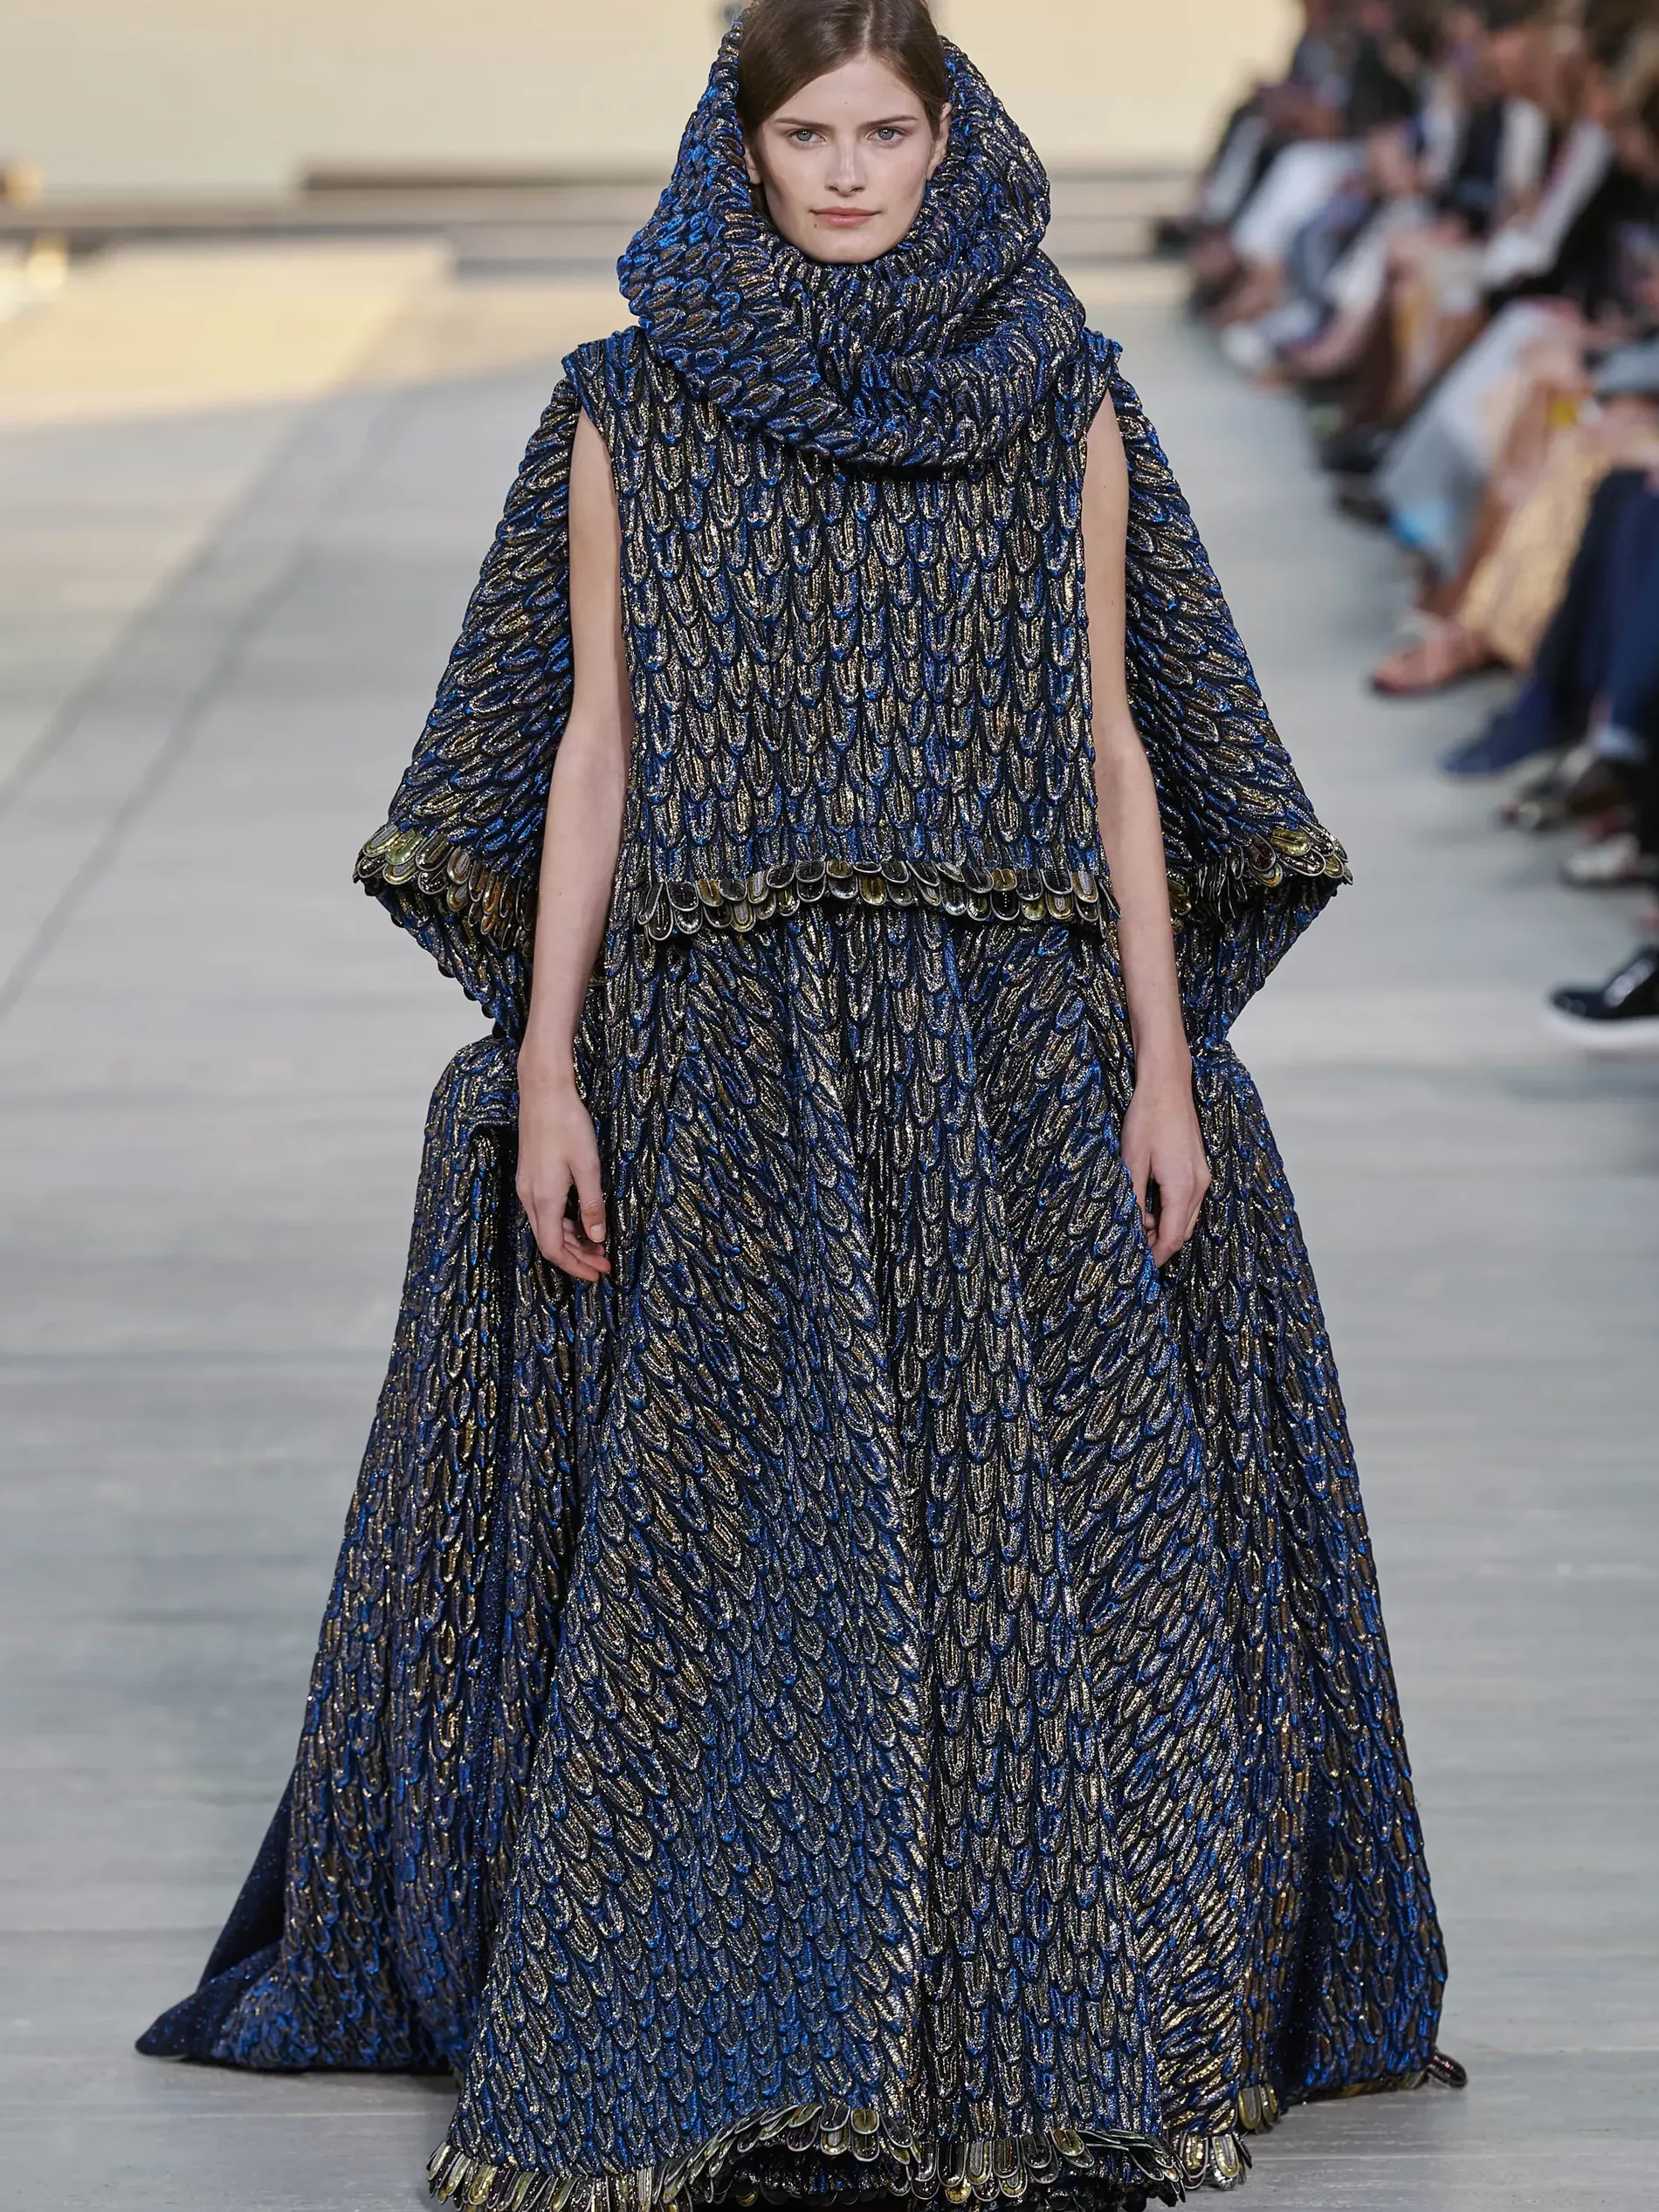 Vogue - See the complete Louis Vuitton Resort 2020 show